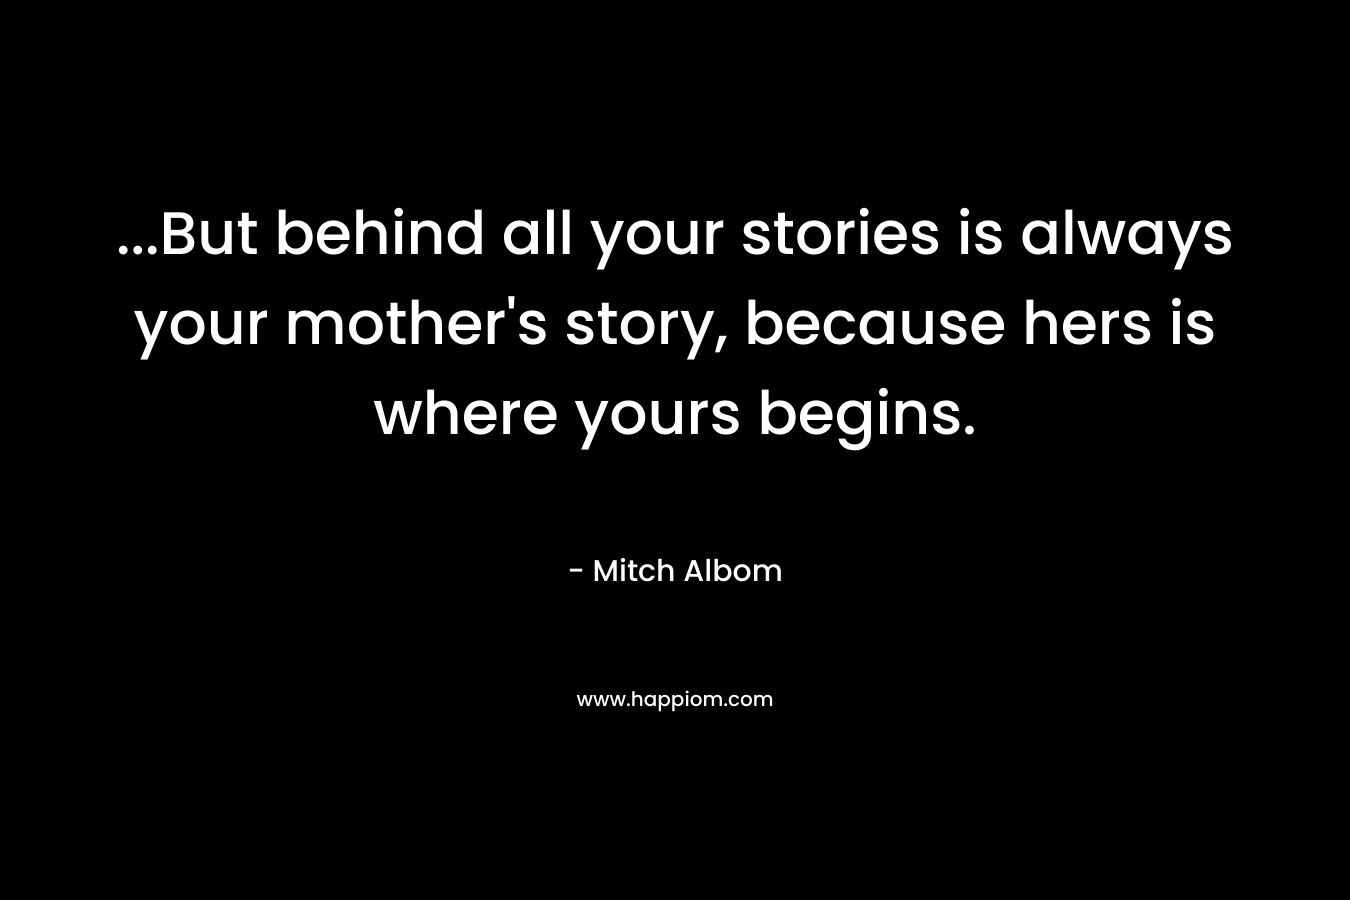 ...But behind all your stories is always your mother's story, because hers is where yours begins.